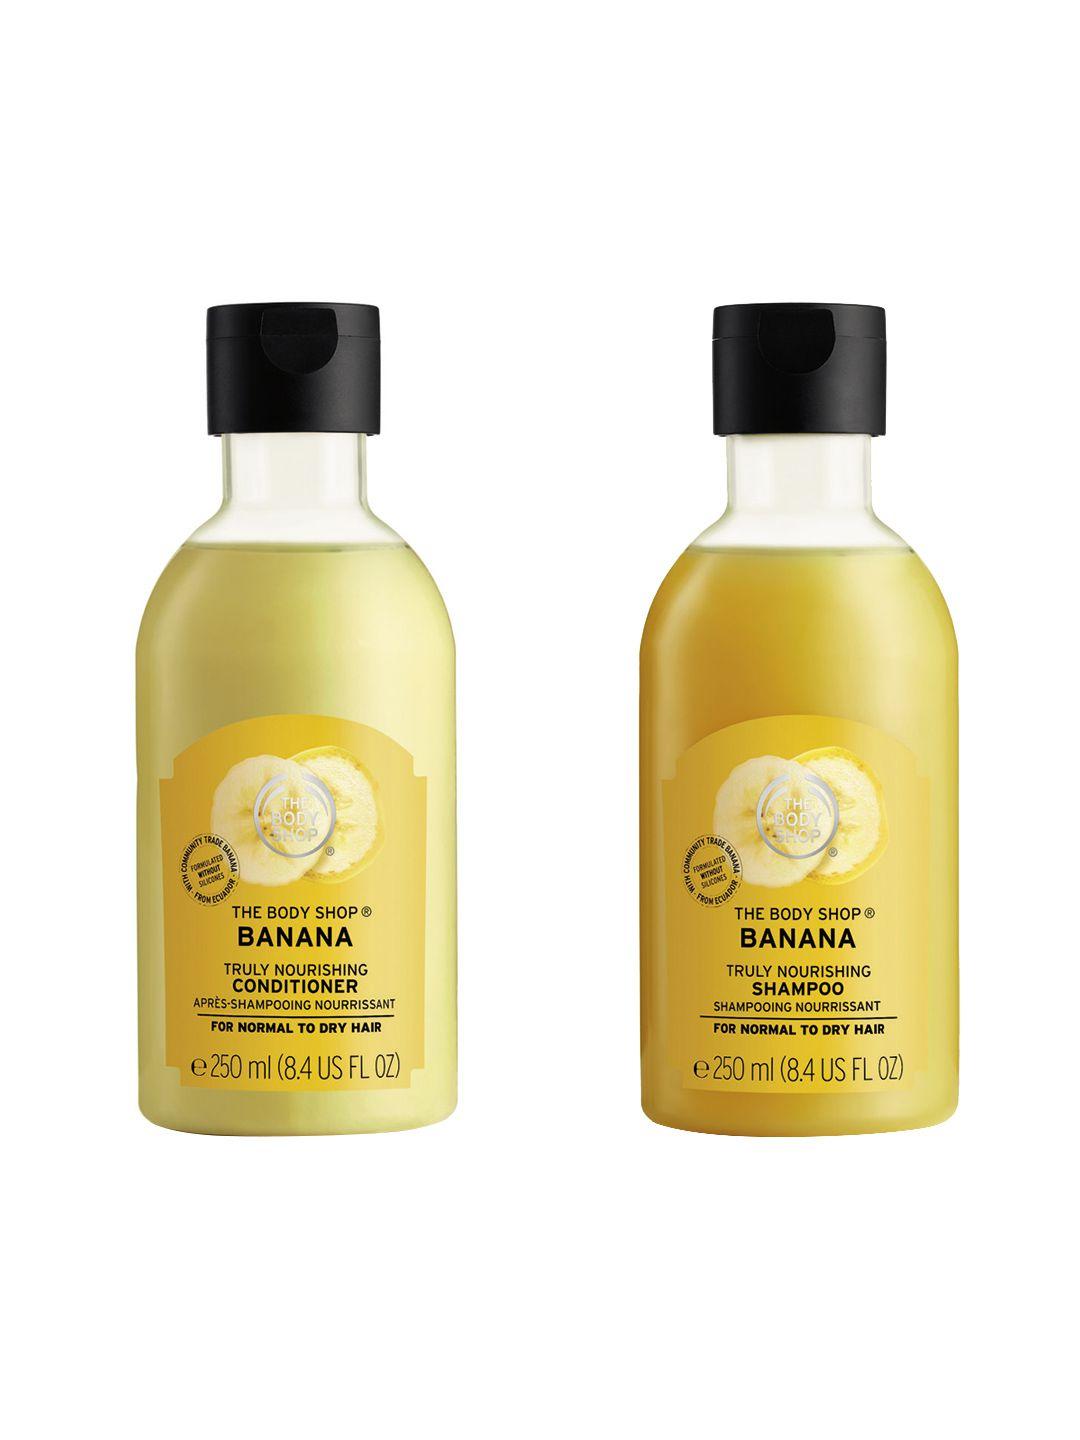 the body shop unisex set of shampoo and conditioner